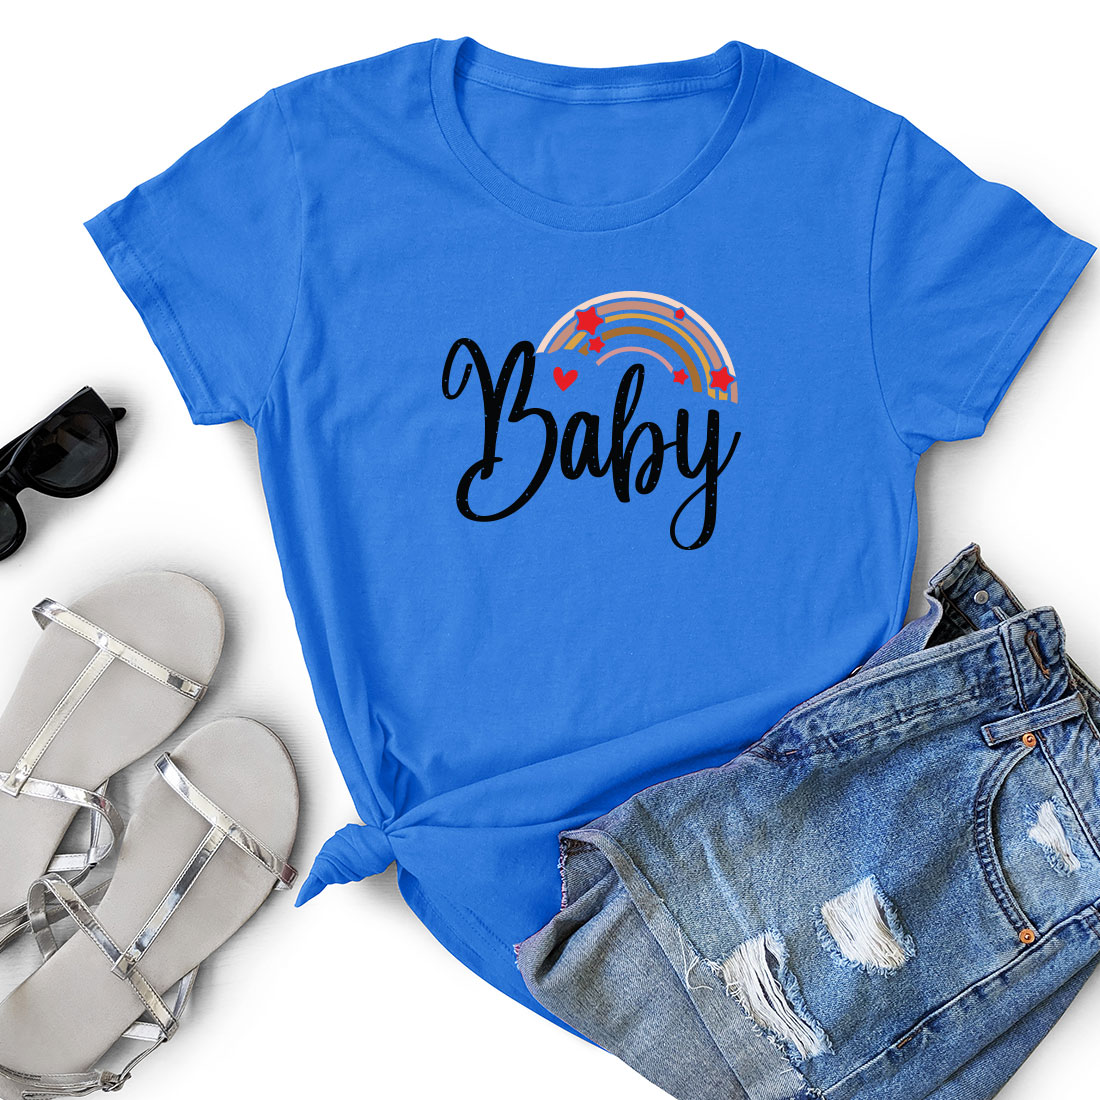 T - shirt that says baby next to a pair of shorts.